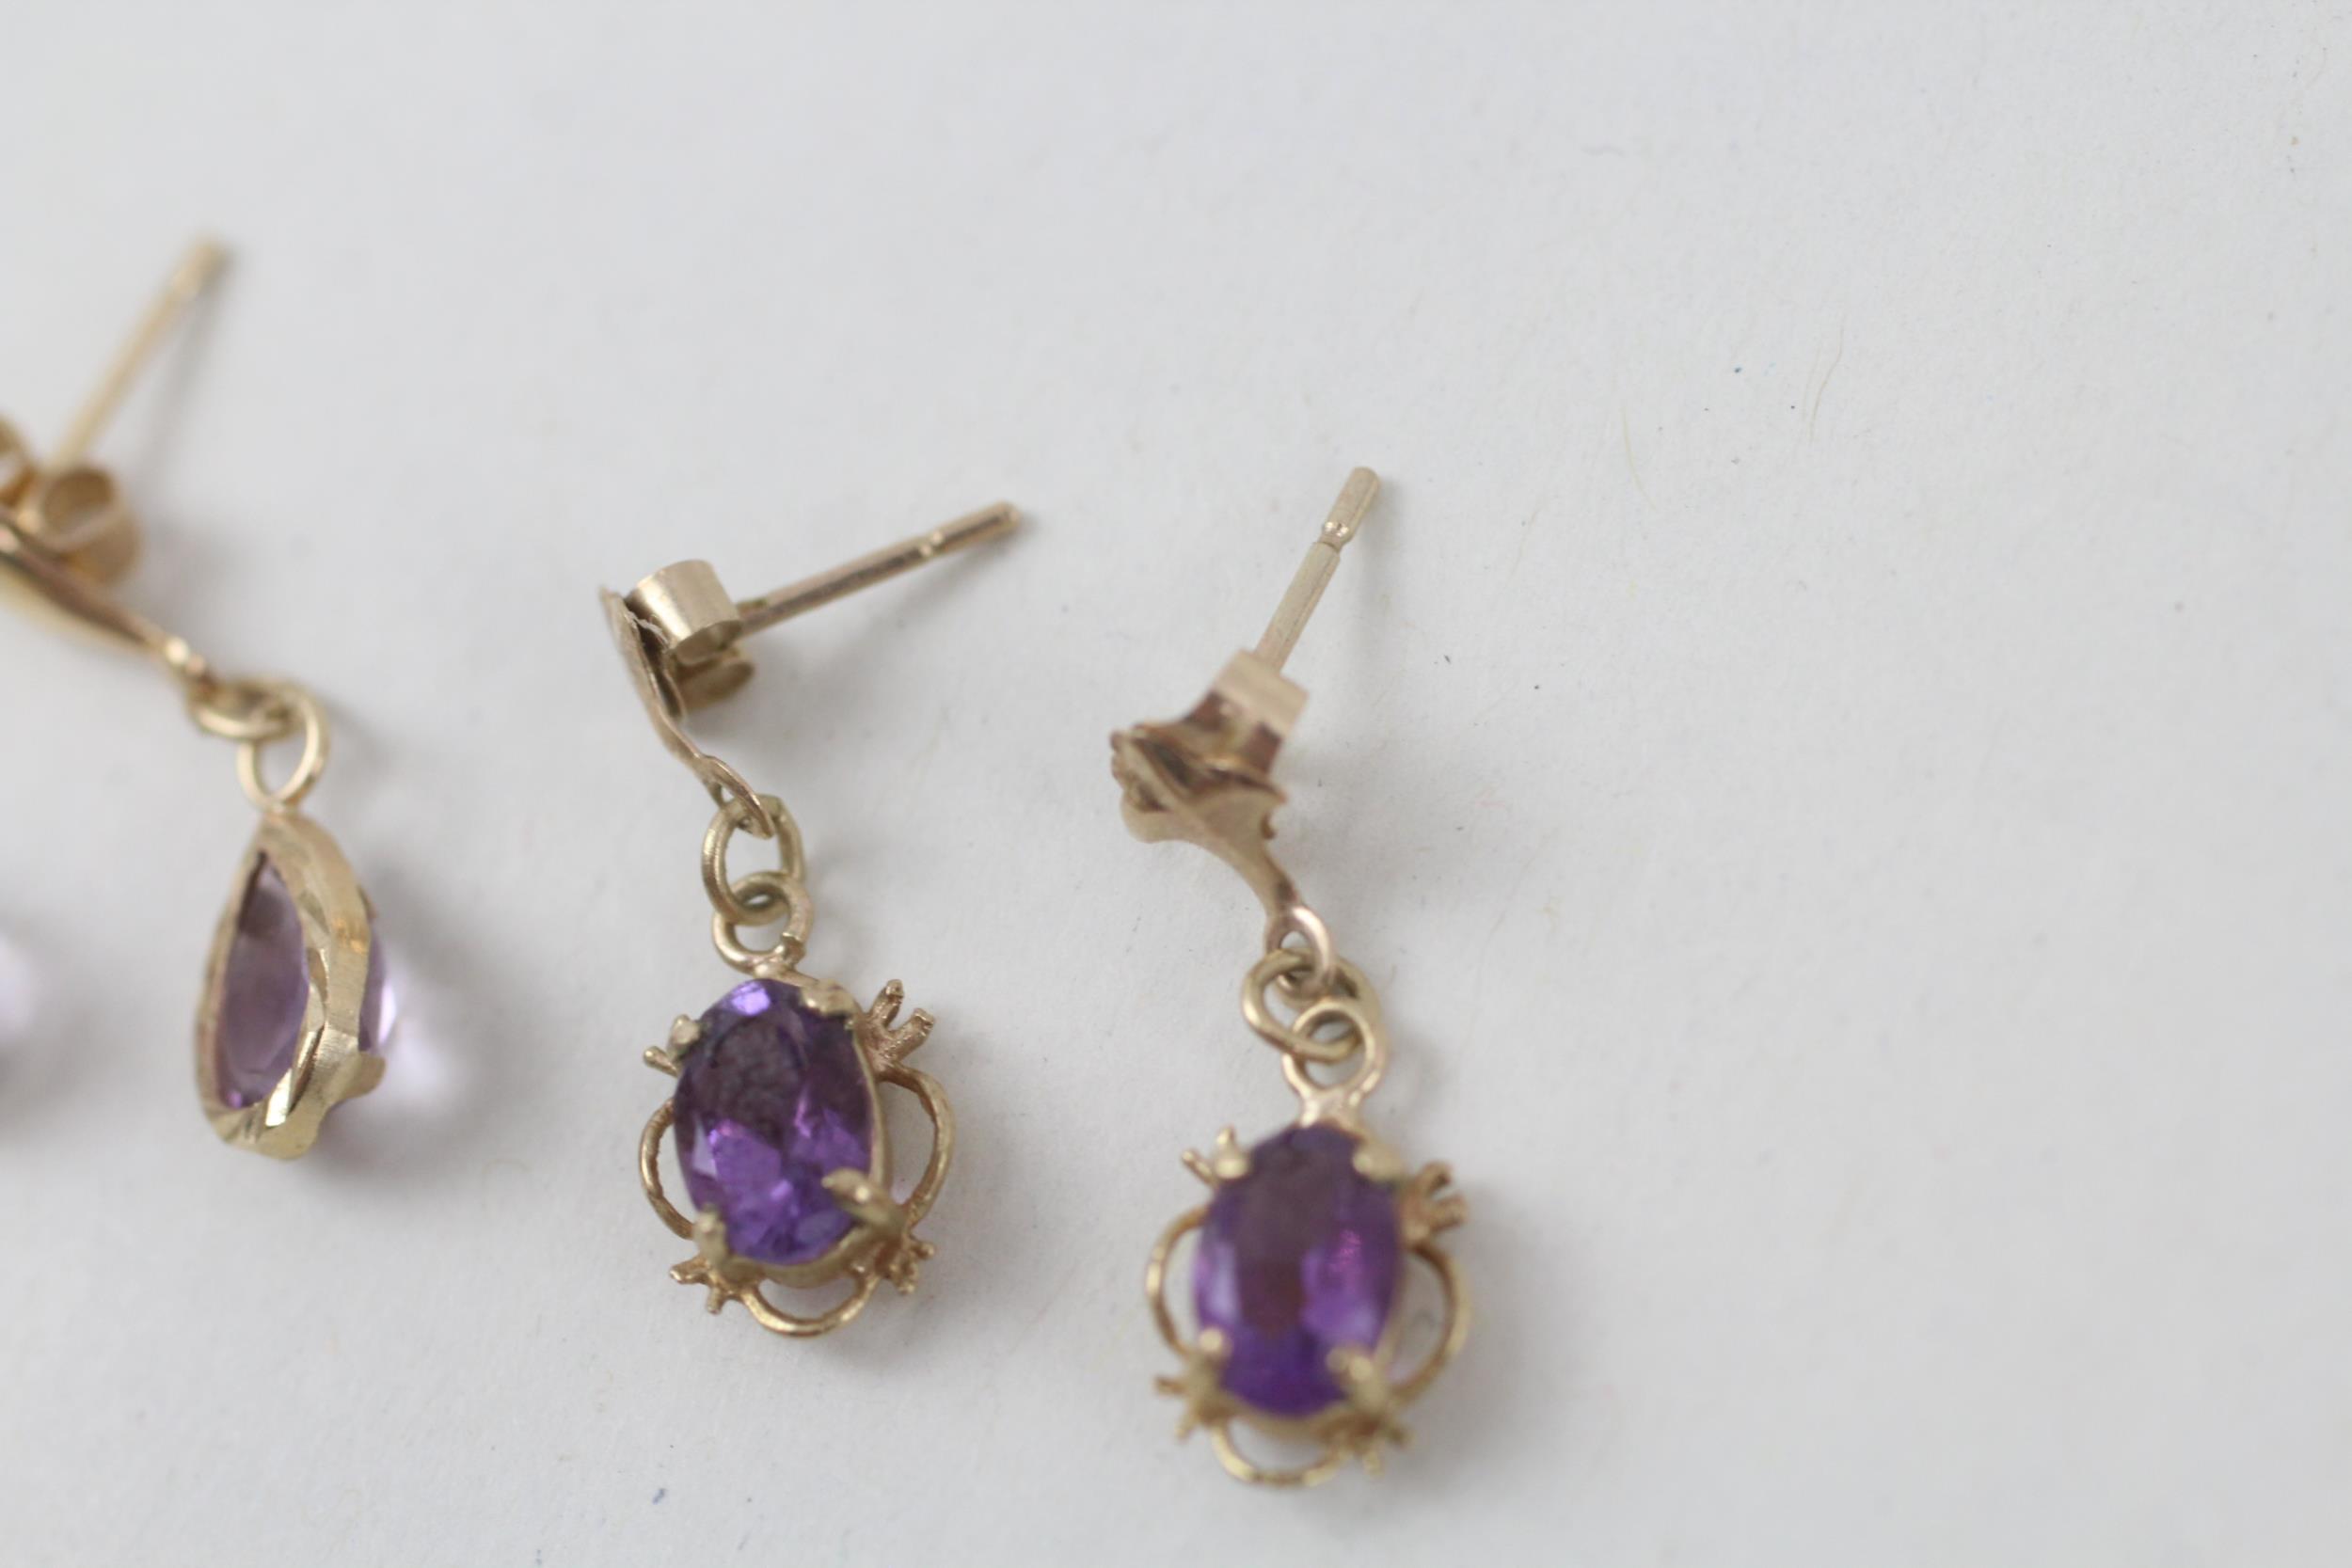 2x 9ct gold amethyst drop earrings with scroll backs - 1.5 g - Image 5 of 8